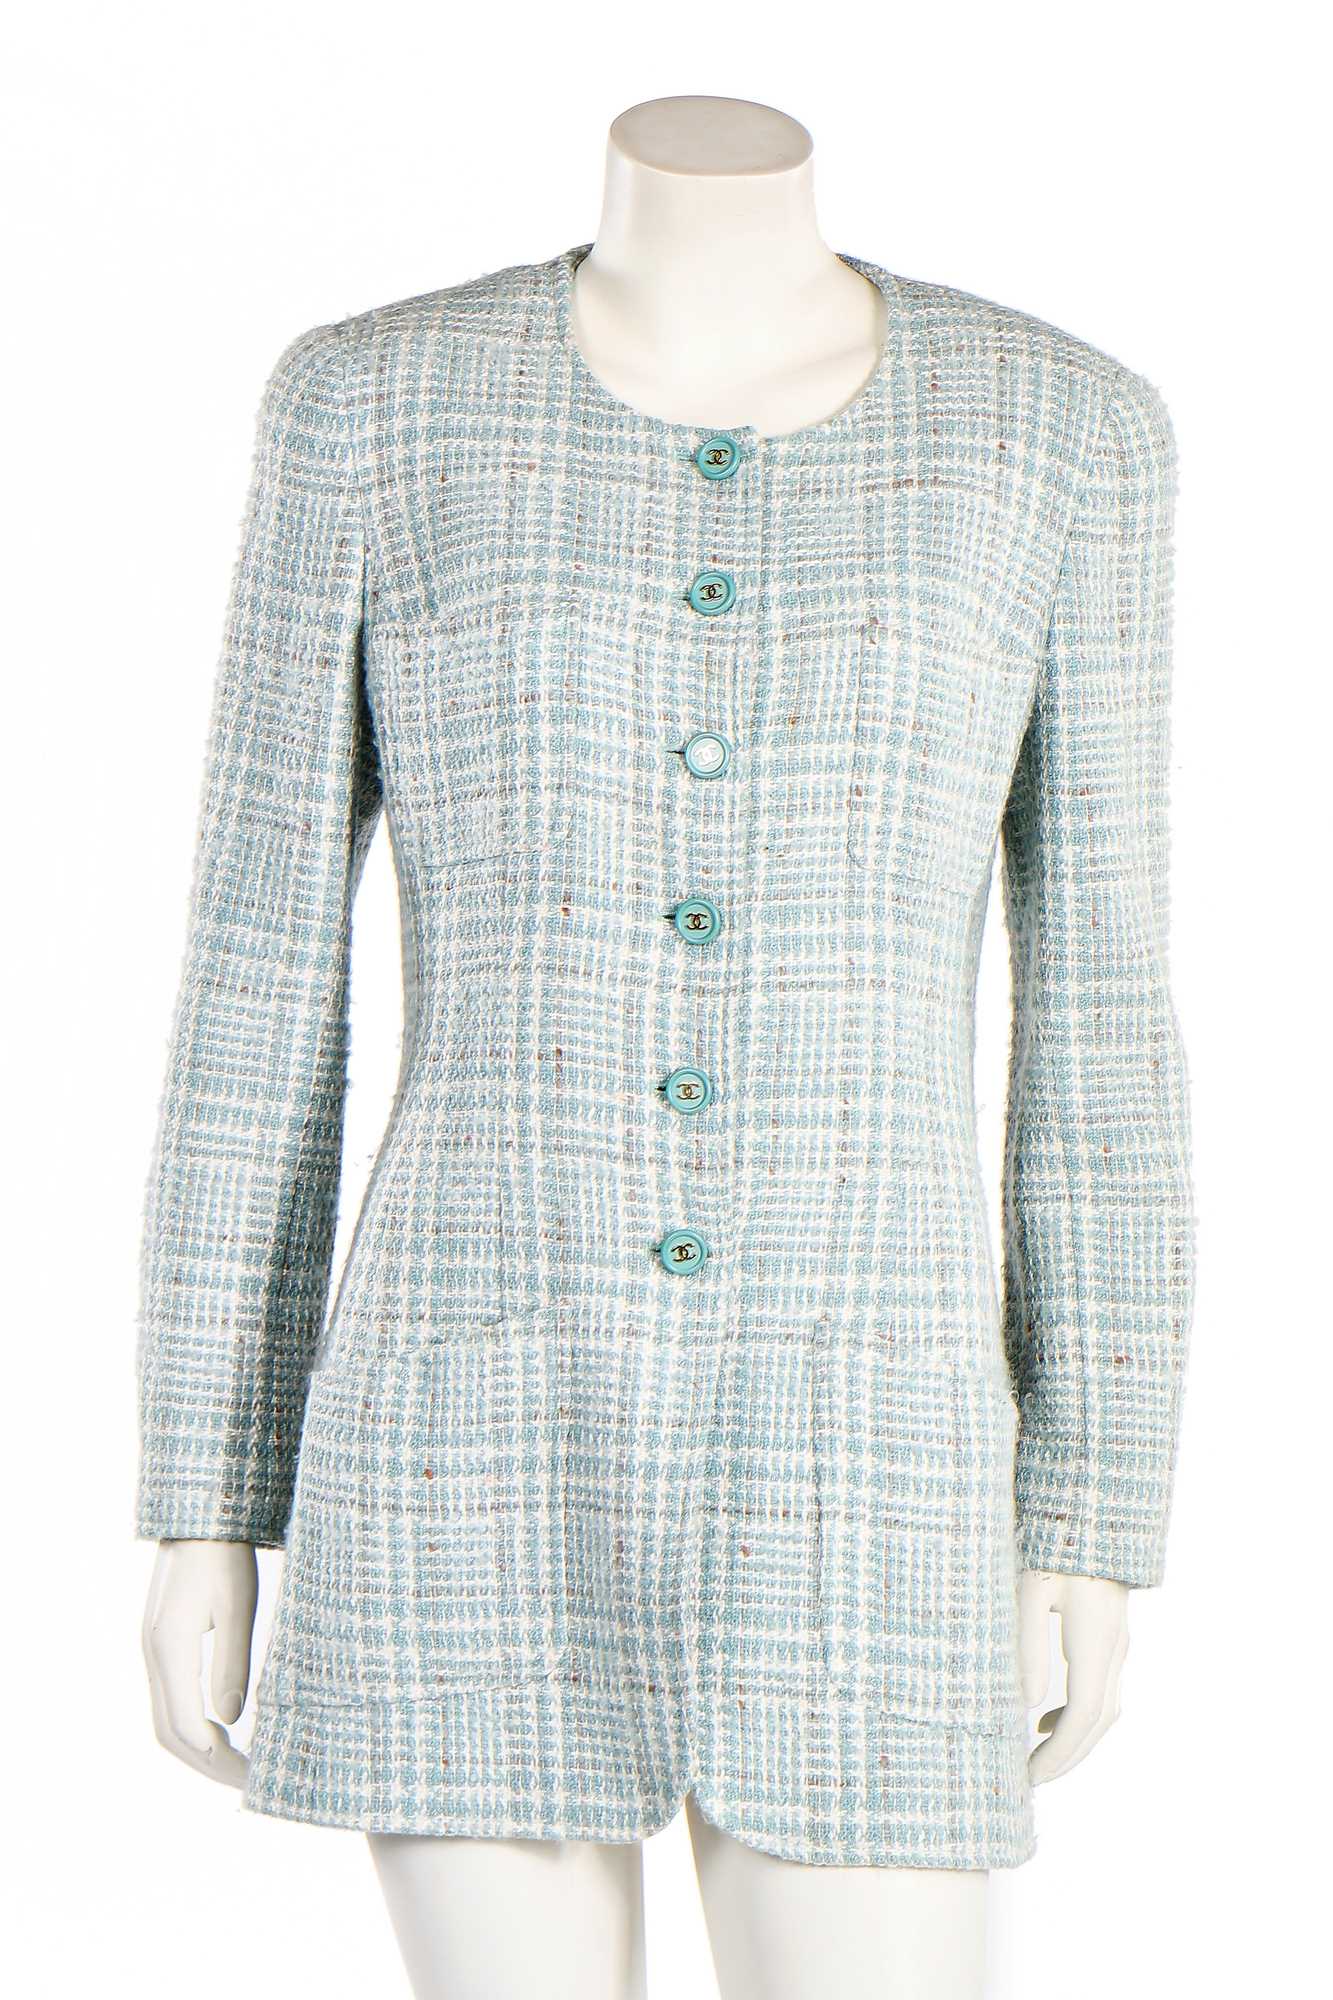 Lot 14 - A Chanel wool-blend tweed jacket in shades of